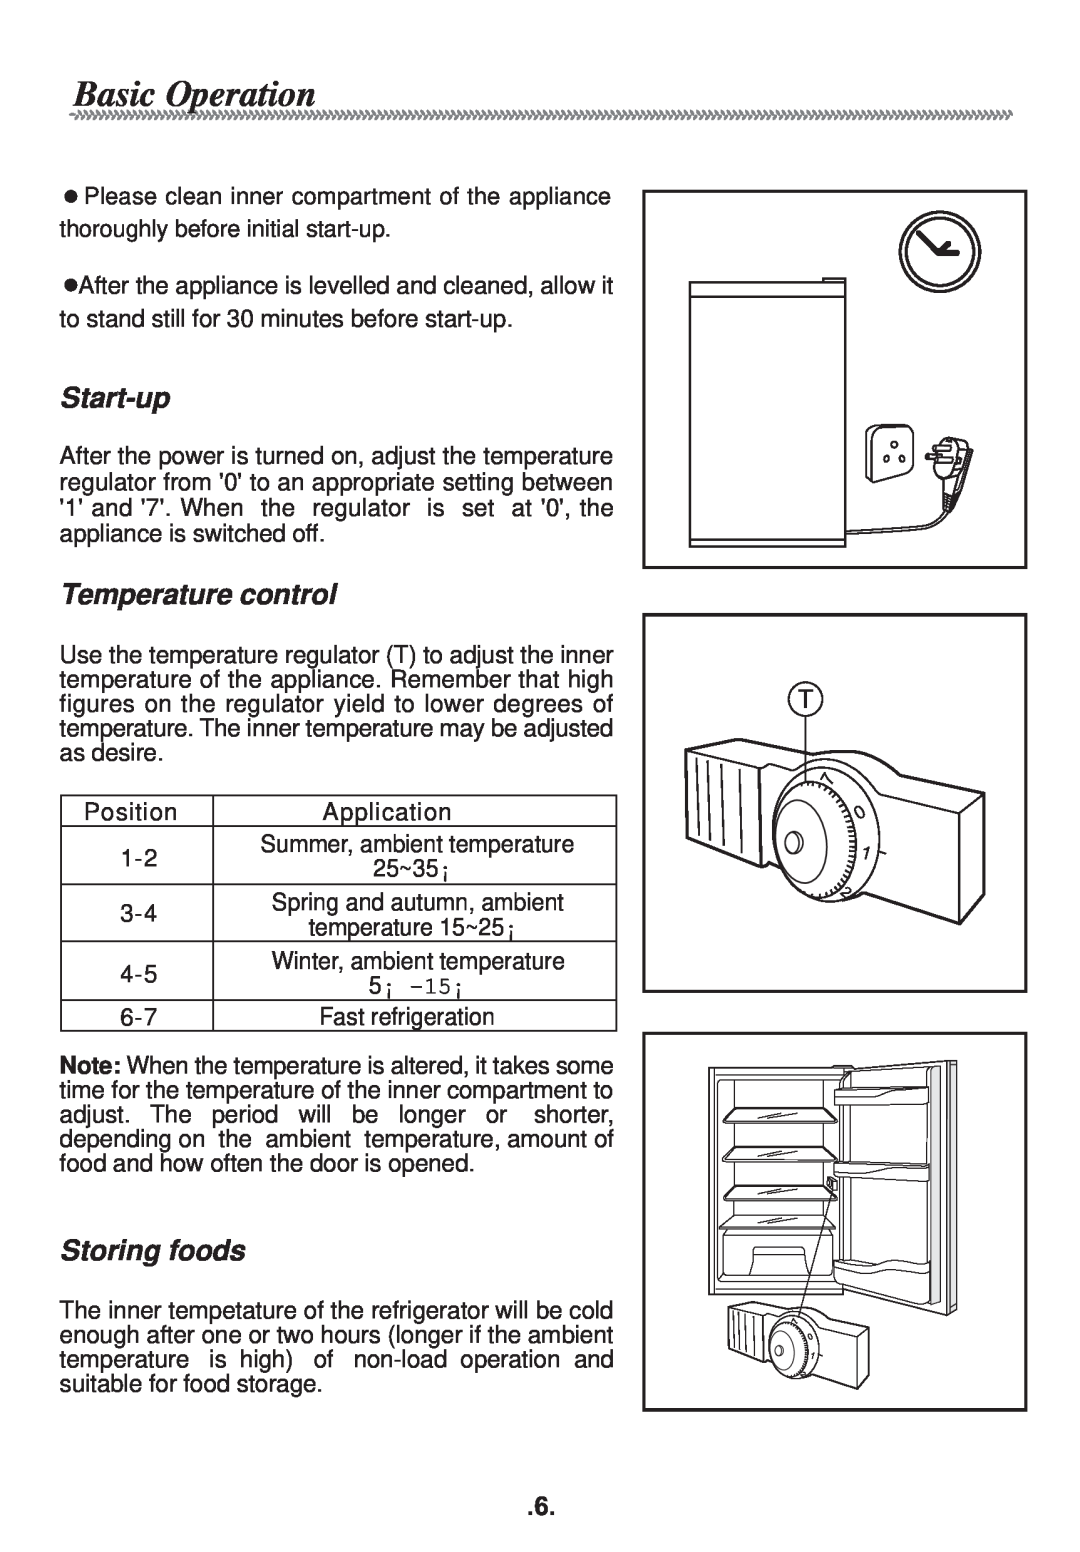 Haier HR-138AR manual Basic Operation, Start-up, Temperature control, Storing foods 